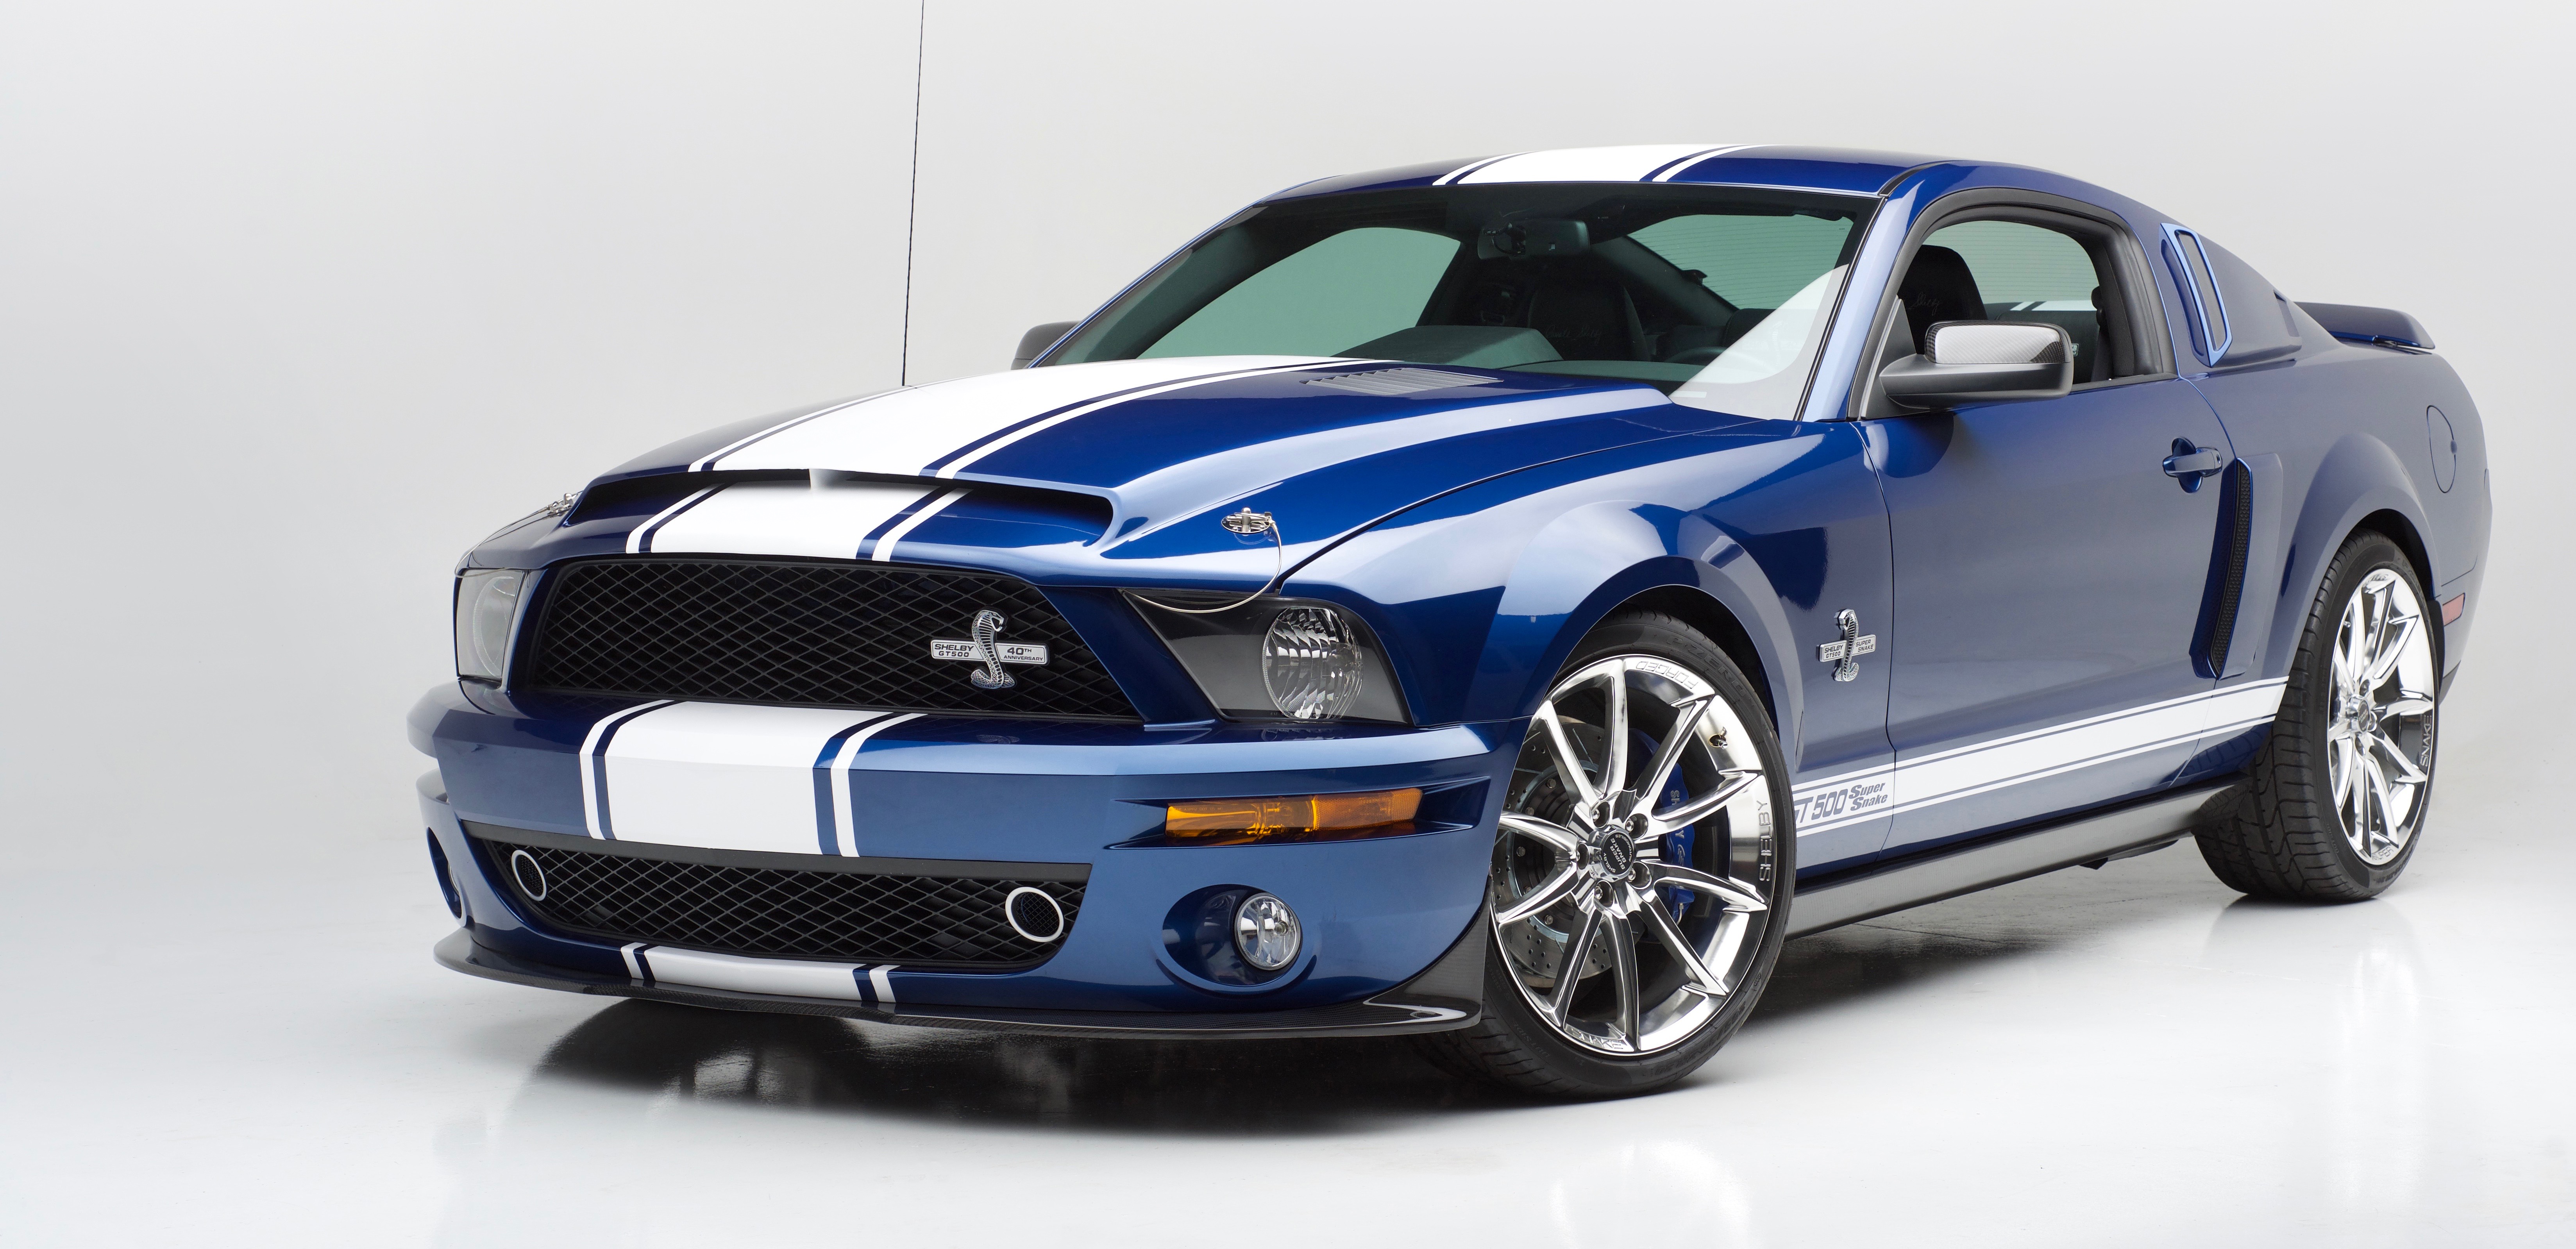 , Barrett-Jackson to auction Shelby Super Snake Mustang to benefit Vegas first responders, ClassicCars.com Journal